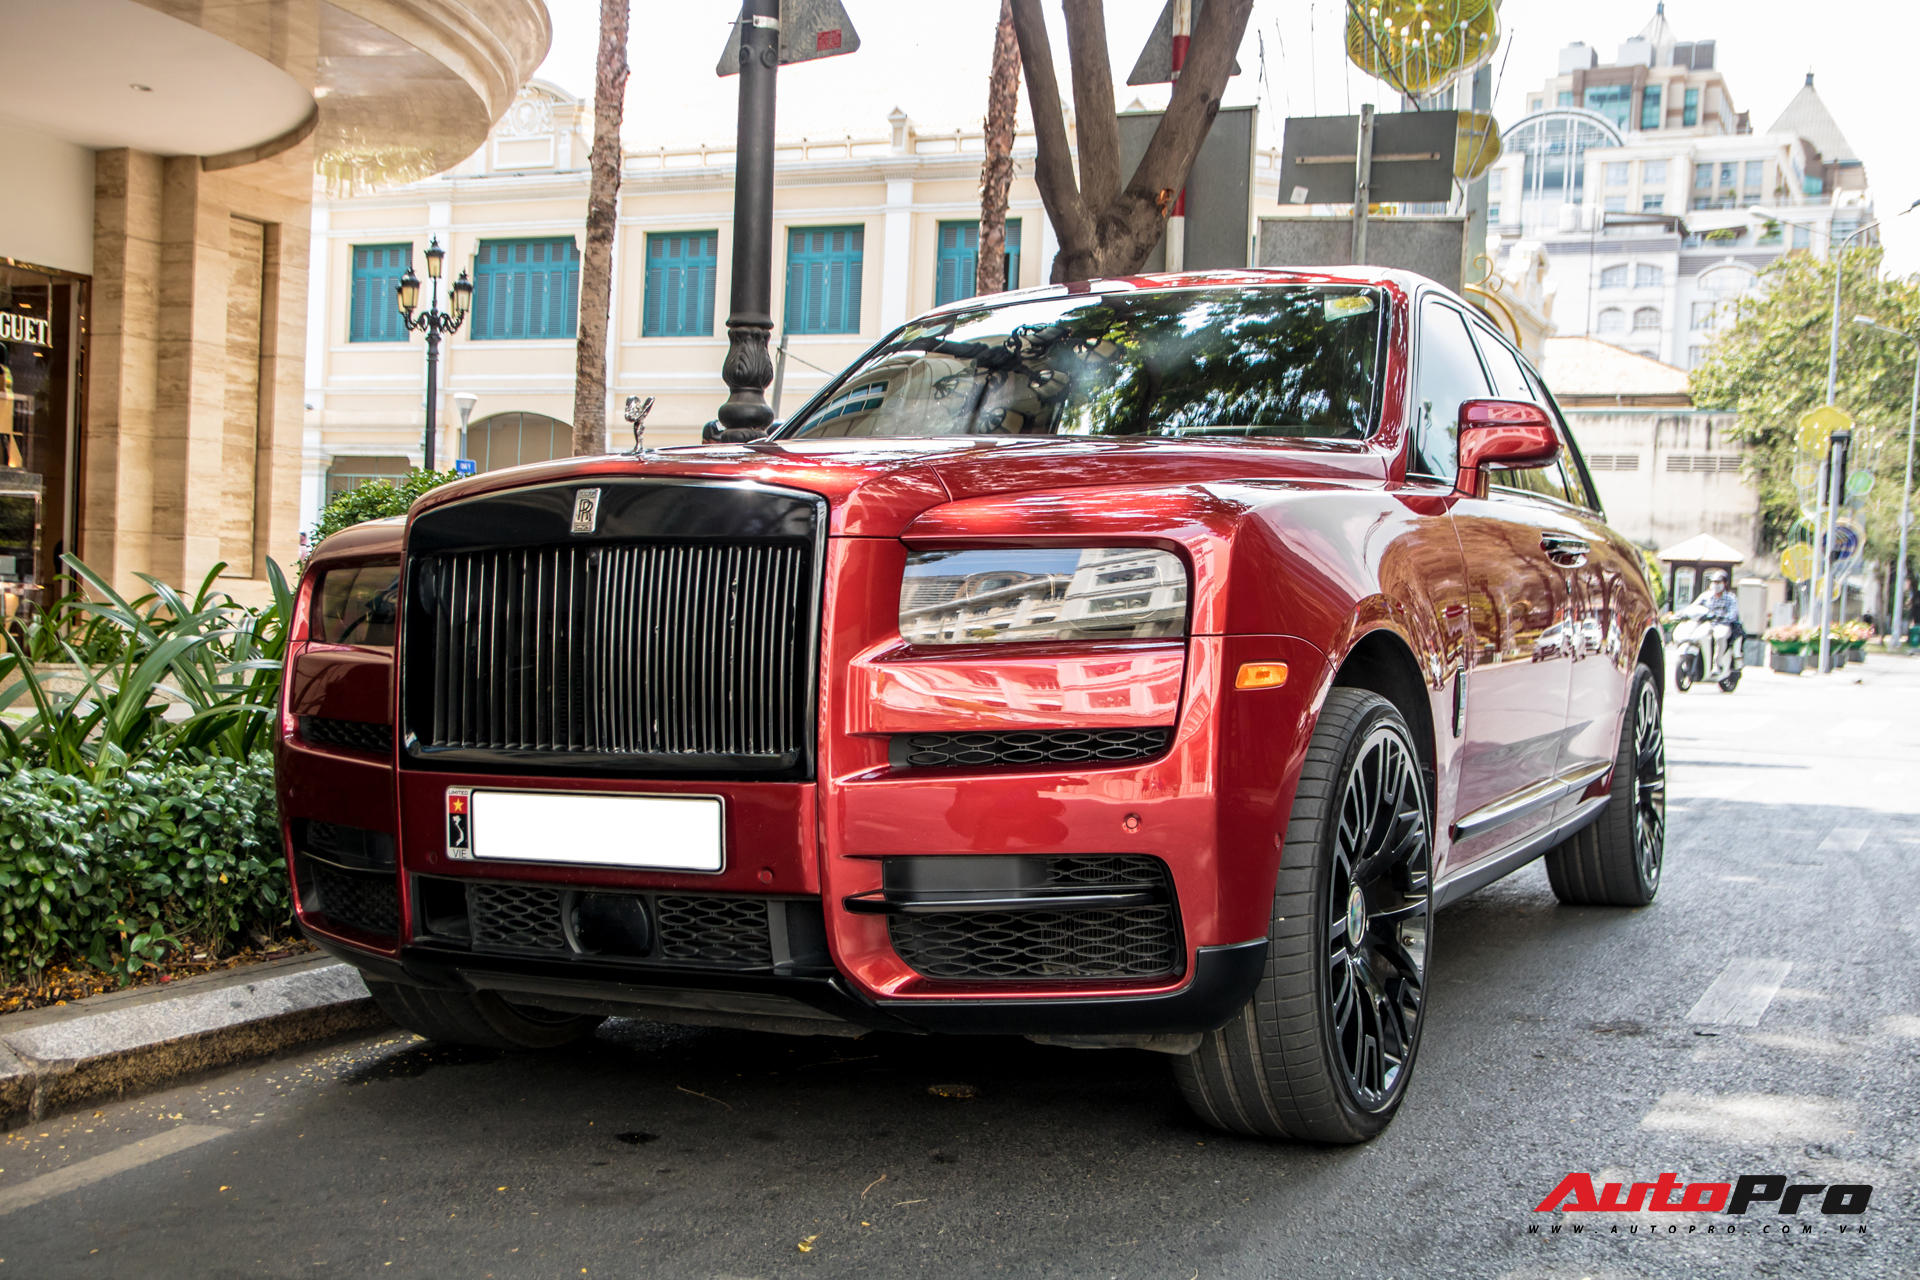 Used 2020 RollsRoyce Cullinan For Sale Sold  Bentley Gold Coast Chicago  Stock GC3126DG0105